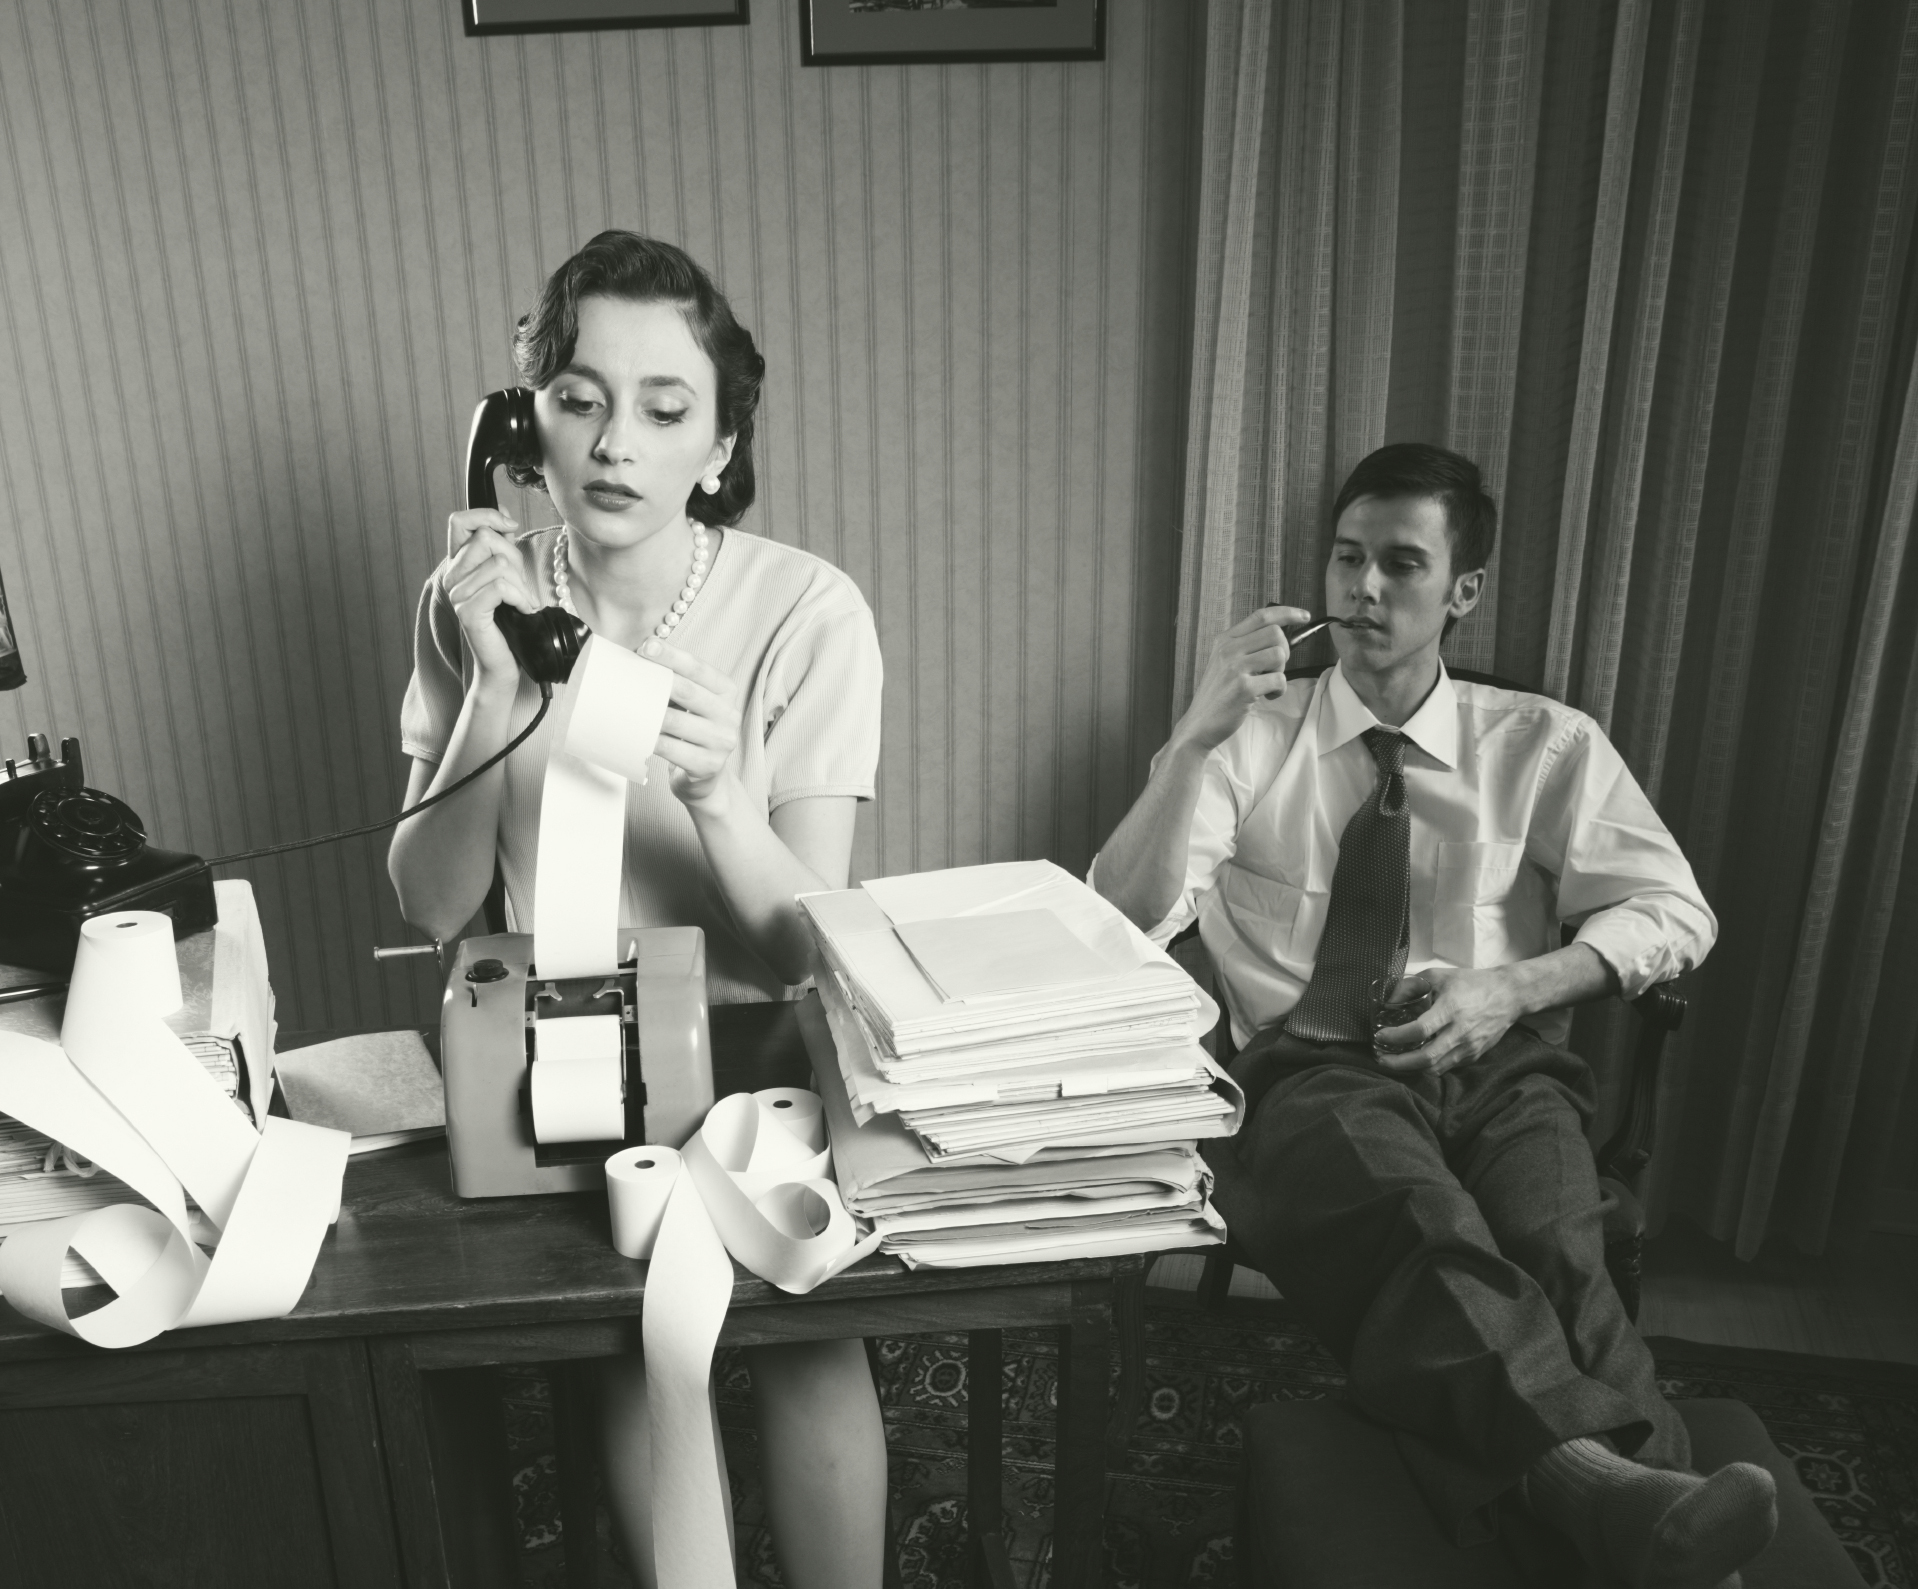 How ‘Mad Men’ Addressed 21st Century Gender Parity in a 1960s Workplace